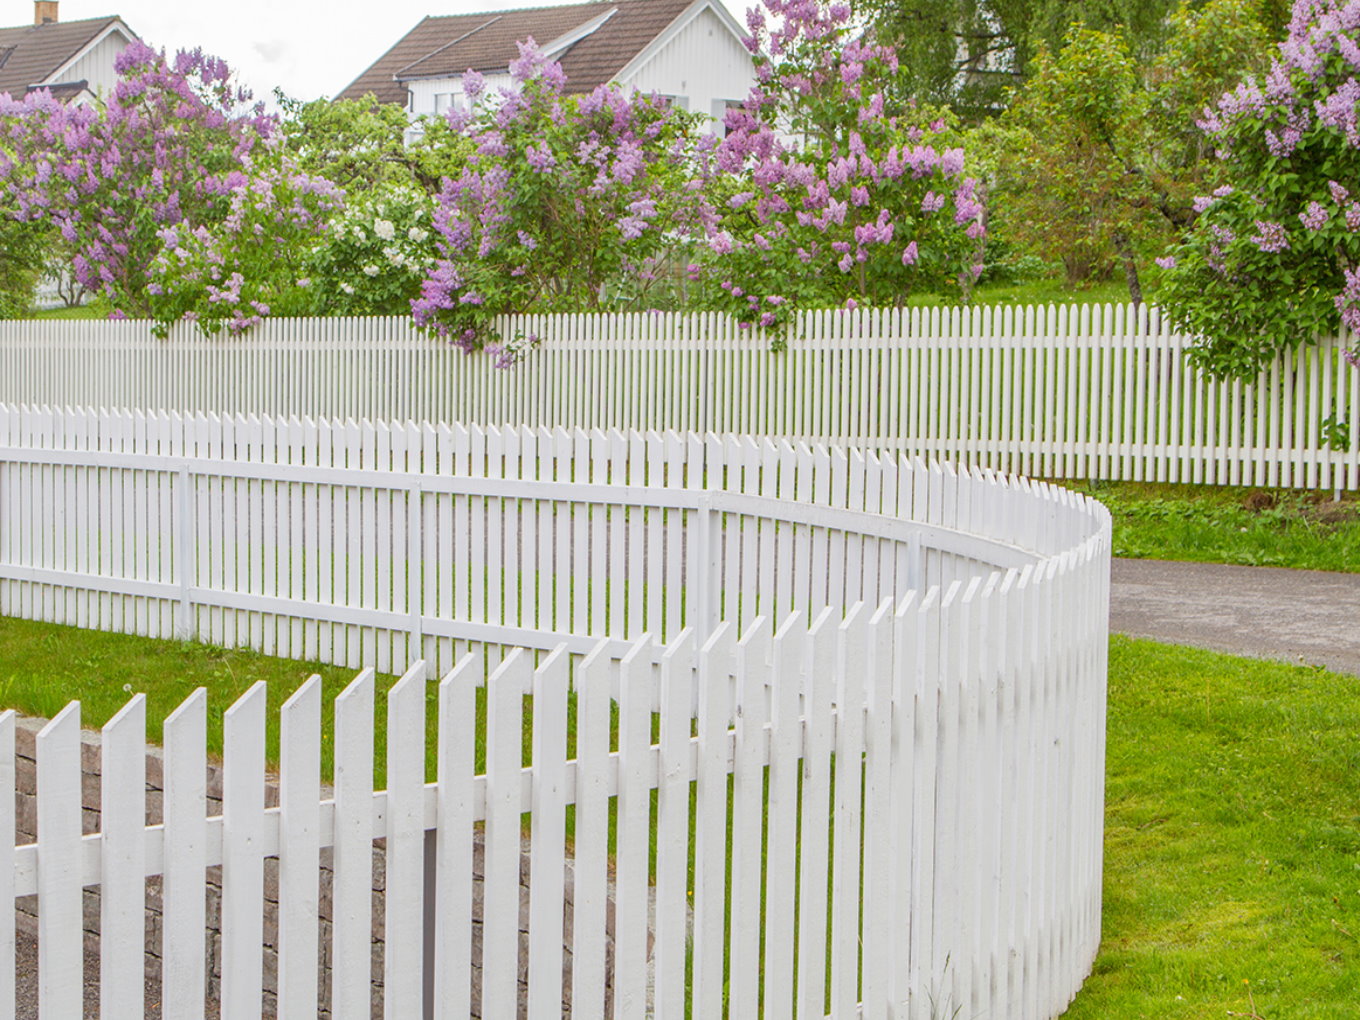 Moseley Virginia residential and commercial fencing